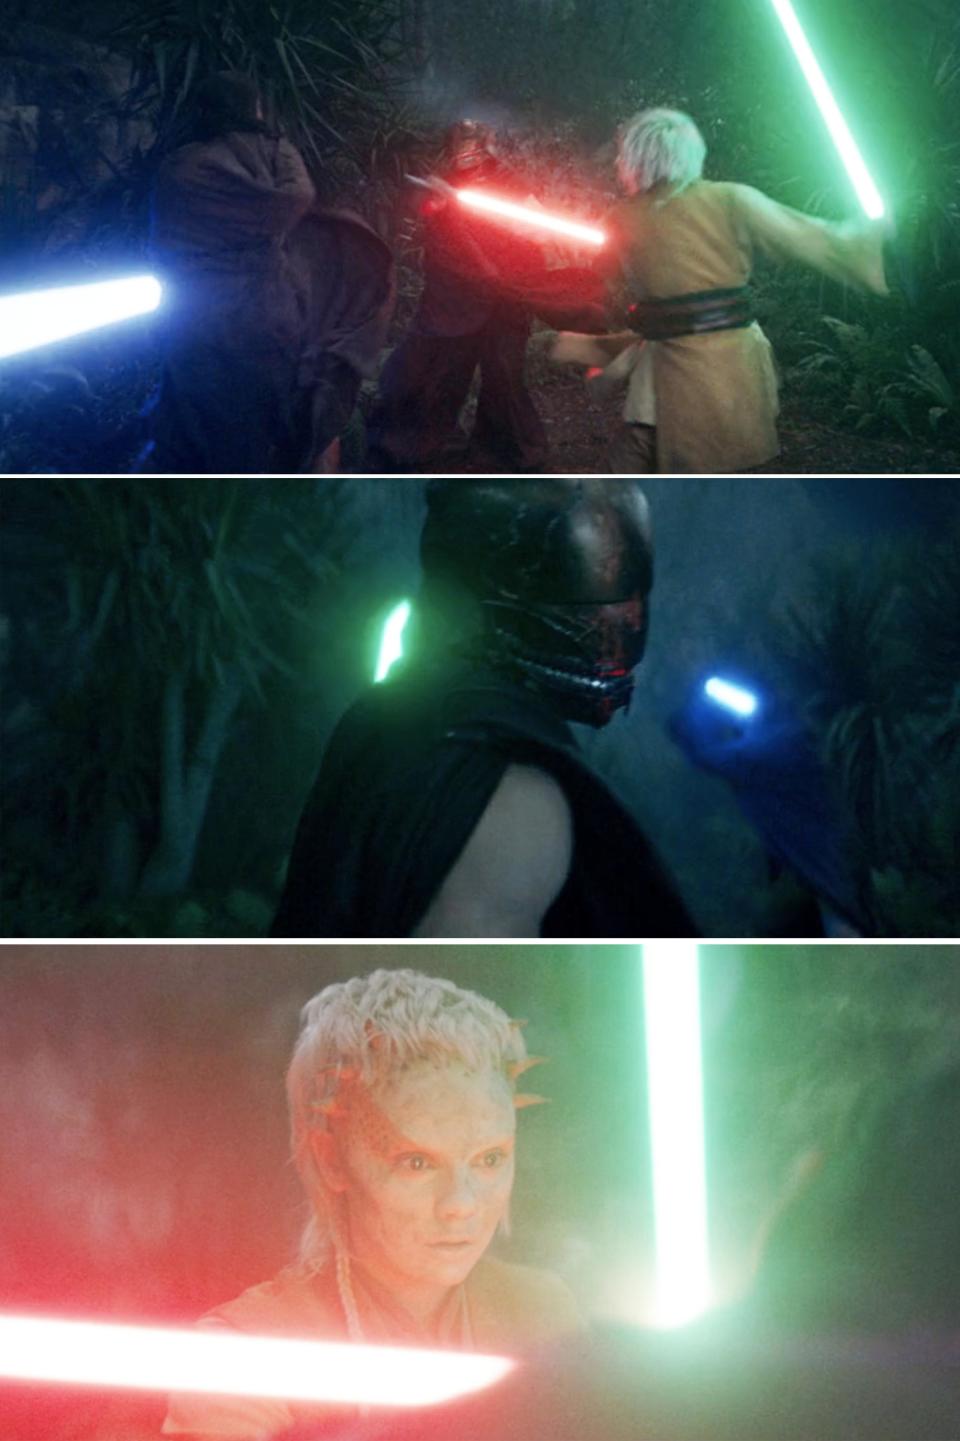 Three scenes from a Star Wars duel with characters wielding lightsabers. The top image shows a multi-character battle, the middle one focuses on a masked character, and the bottom one features an unmasked character with white hair